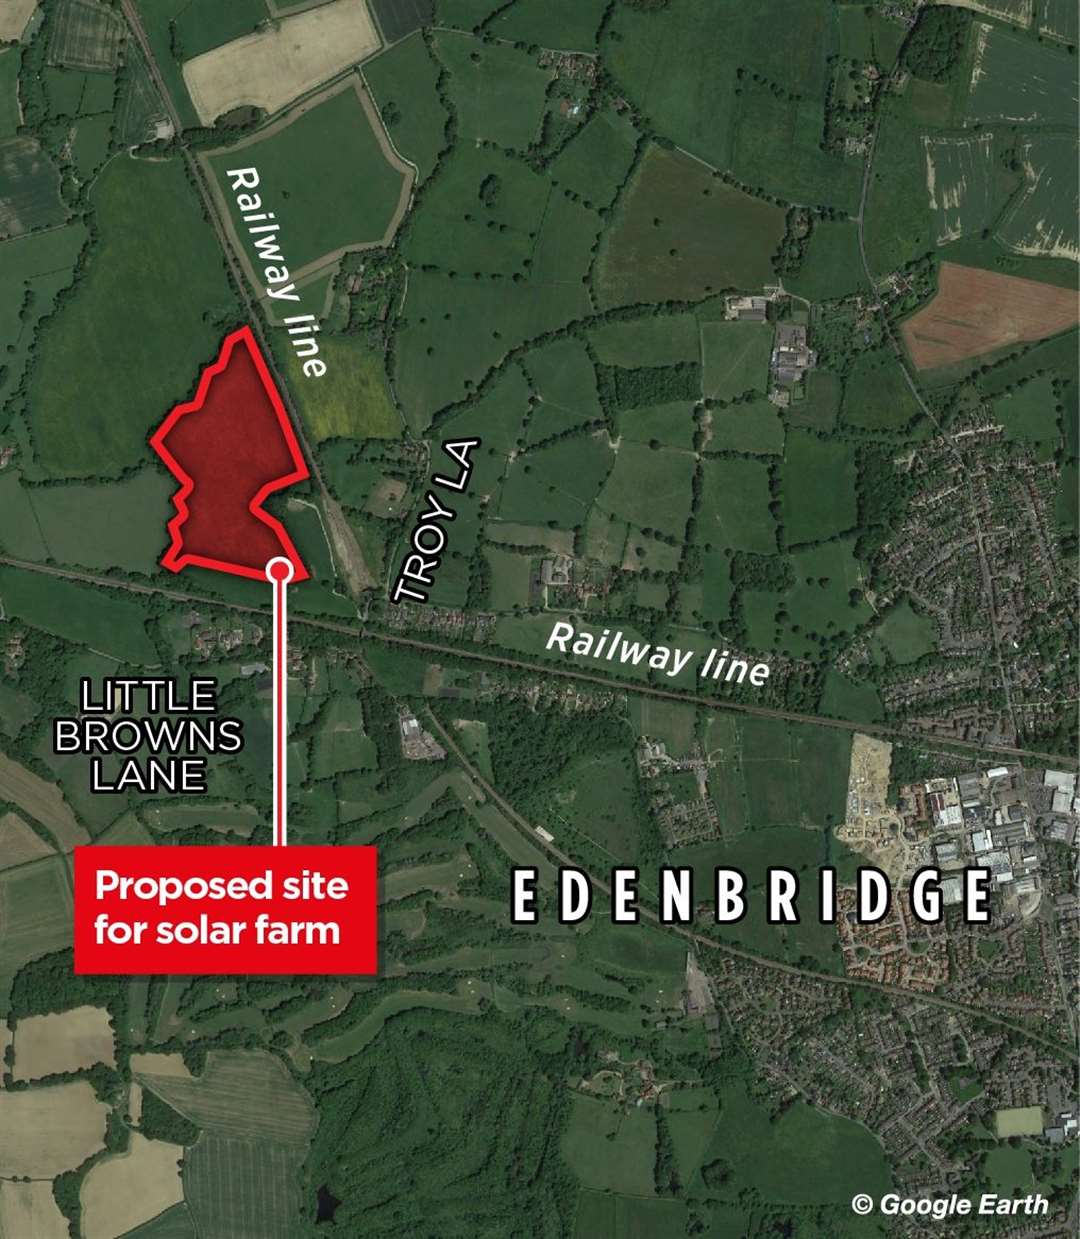 The location of the proposed solar farm